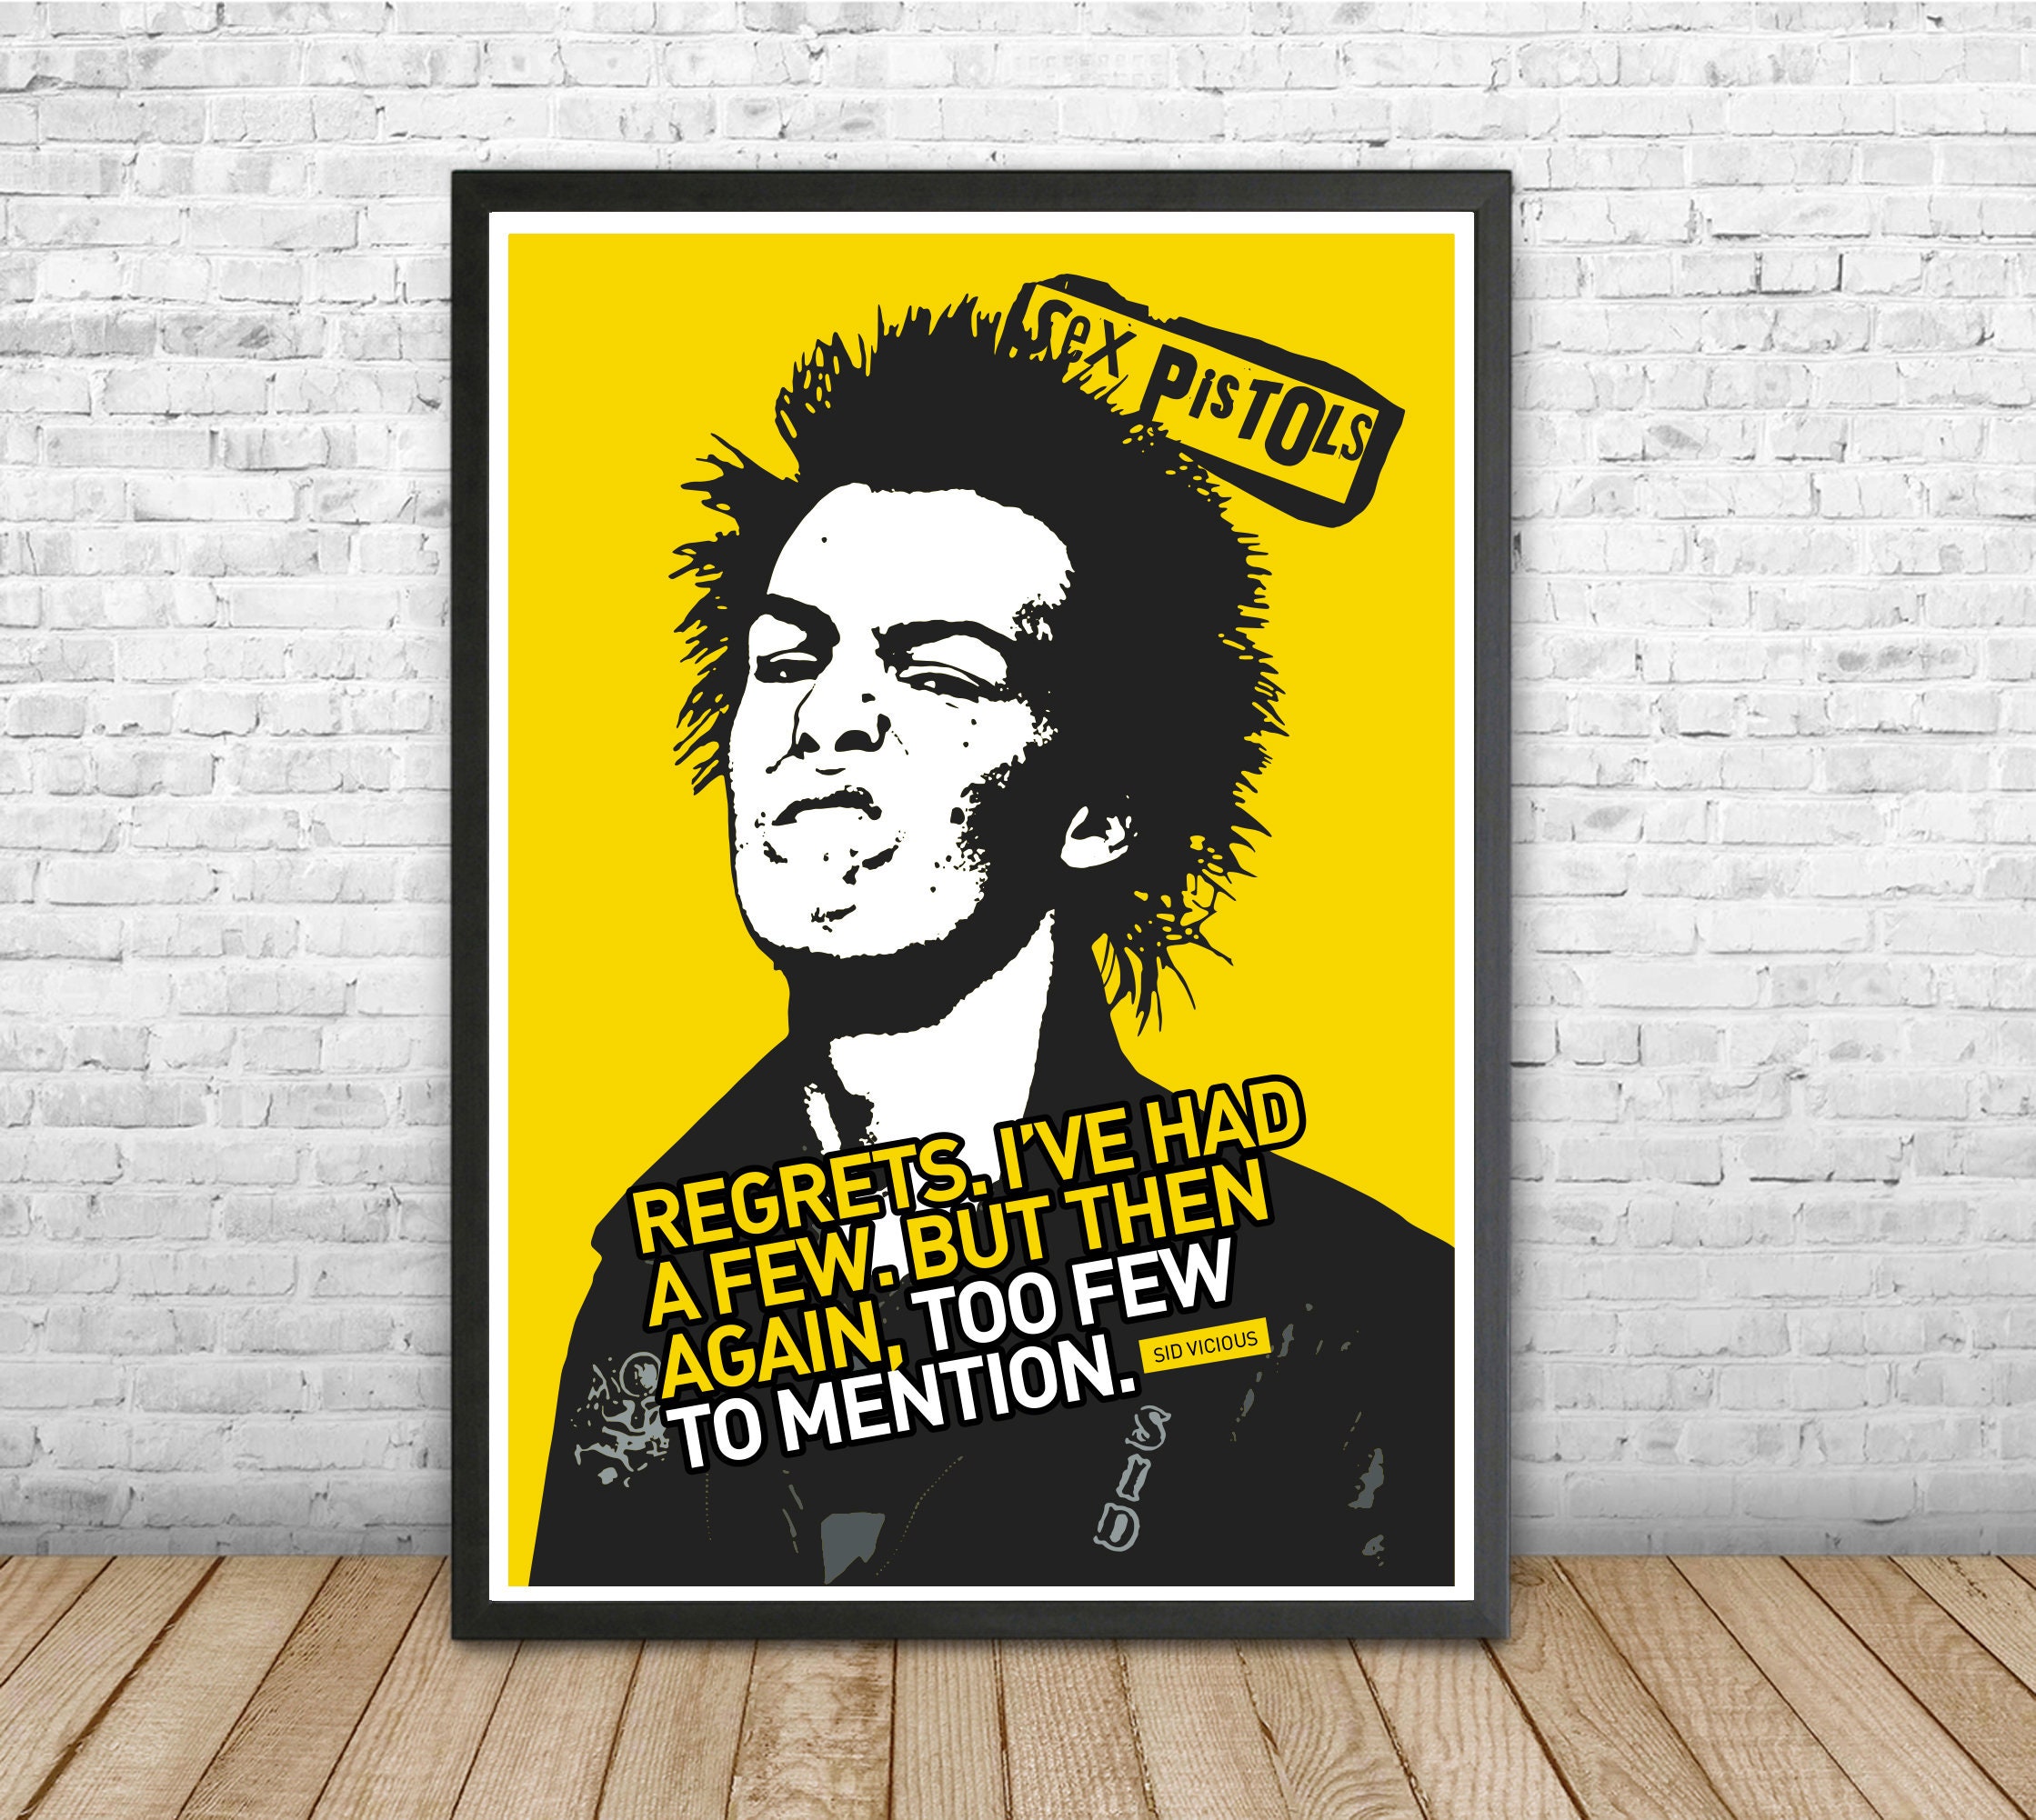 Sid Vicious portrait and song quote. 